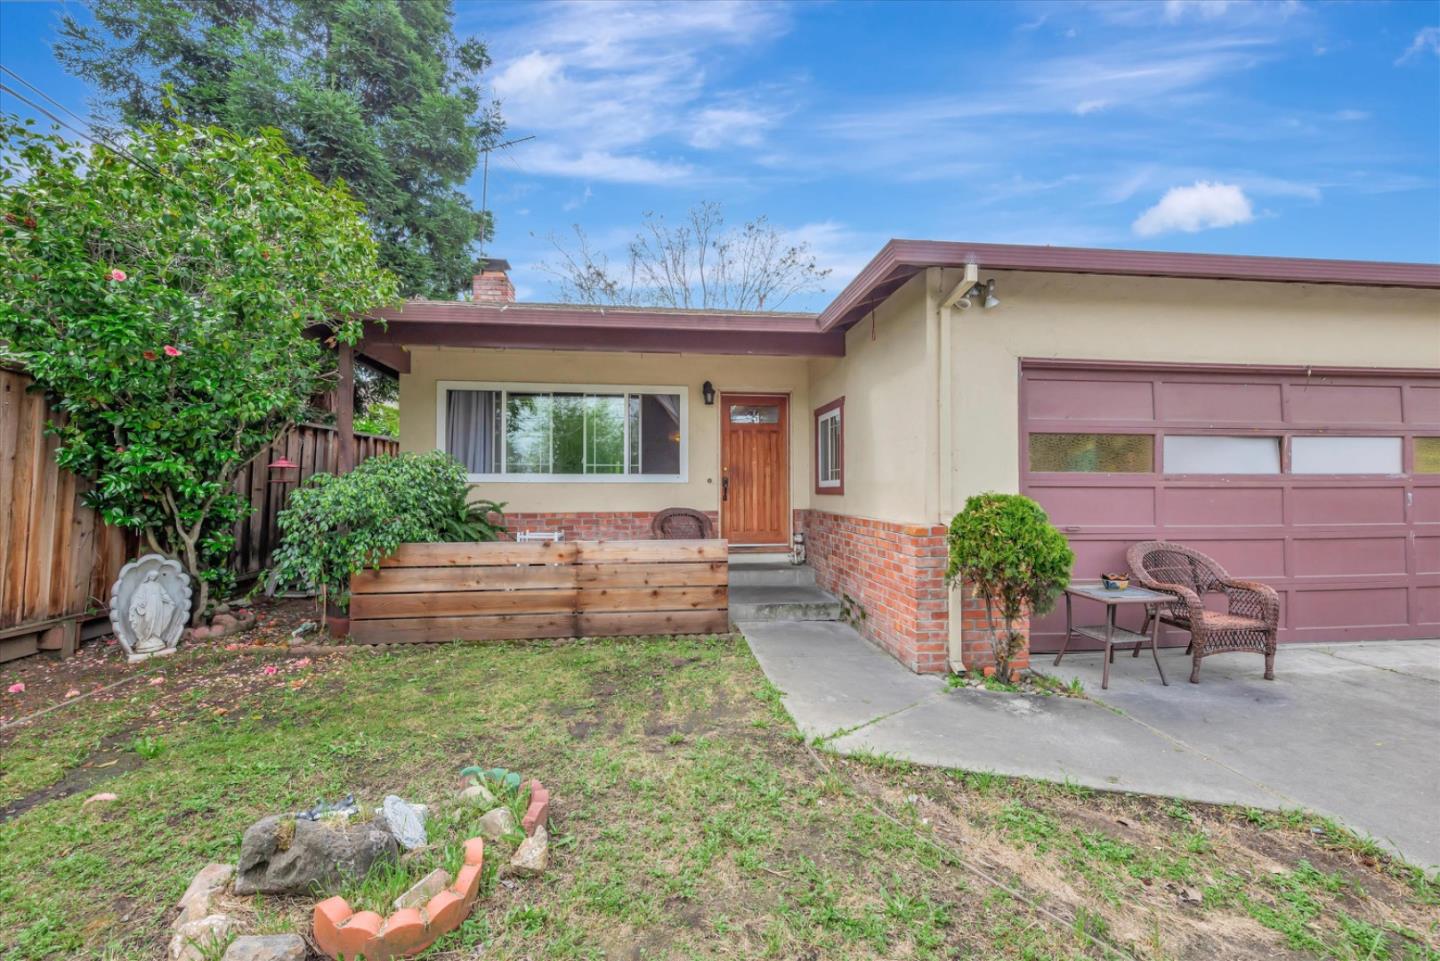 Photo of 2171 Leland Ave in Mountain View, CA